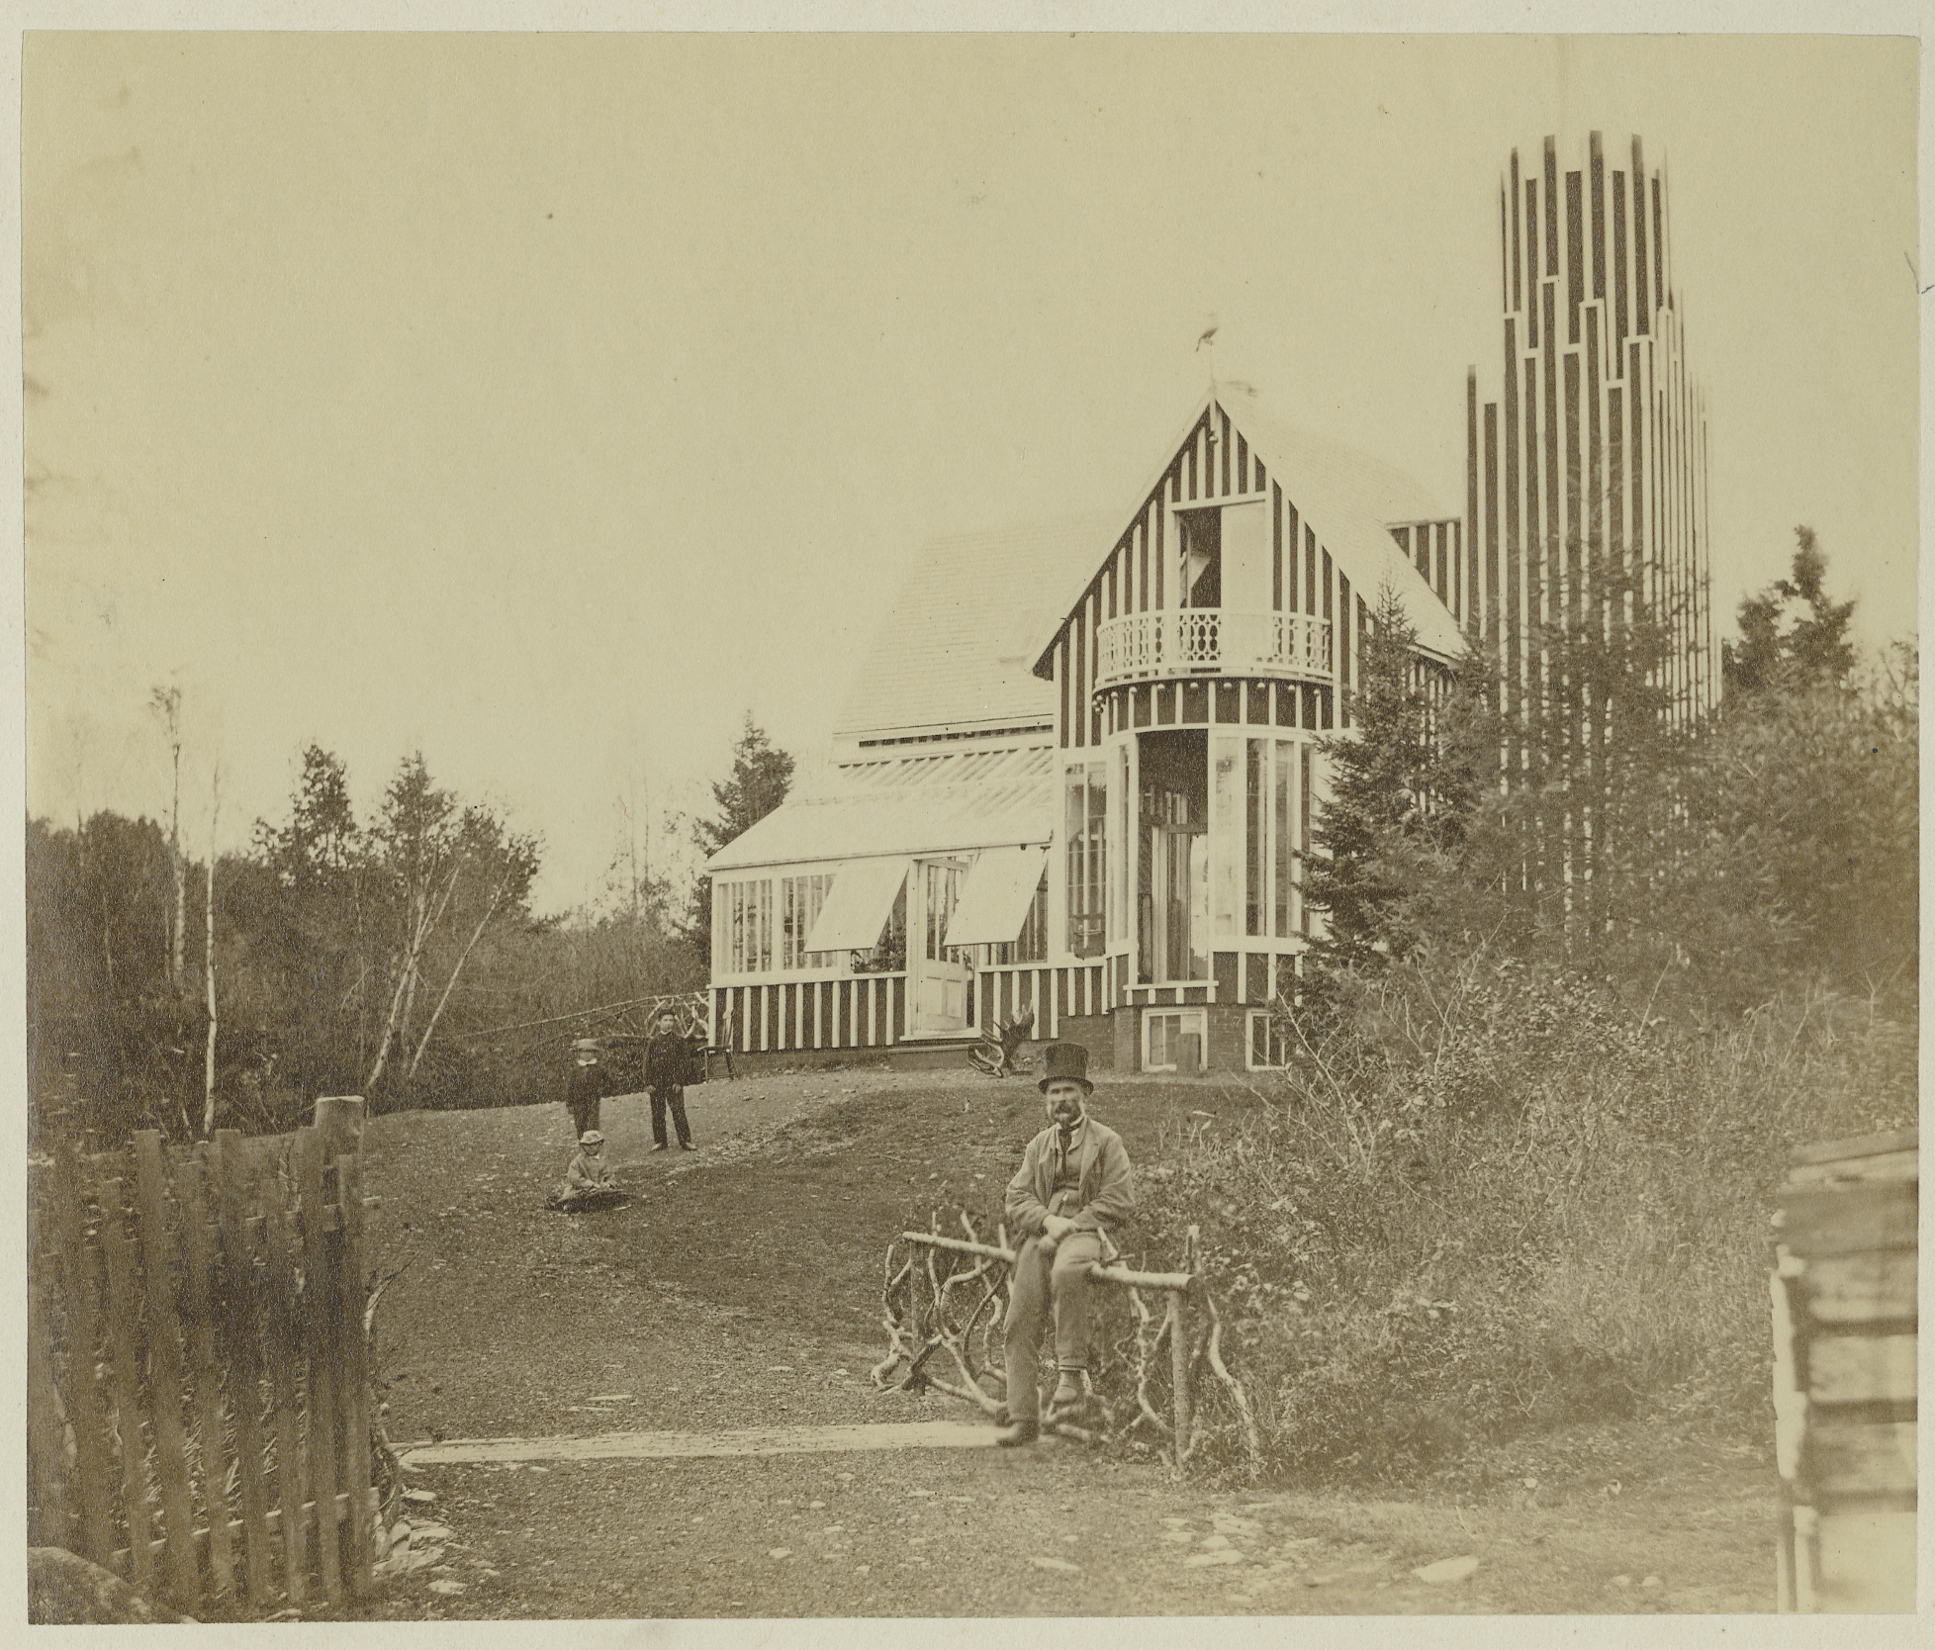    The Glass House  , The only photograph known to exist of Downs’ Zoological Gardens. The proprietor himself perches in front of the Glass House (the zoo’s aviary) in the 1860's.  (Presented with permission from the Nova Scotia Provincial Archives) 